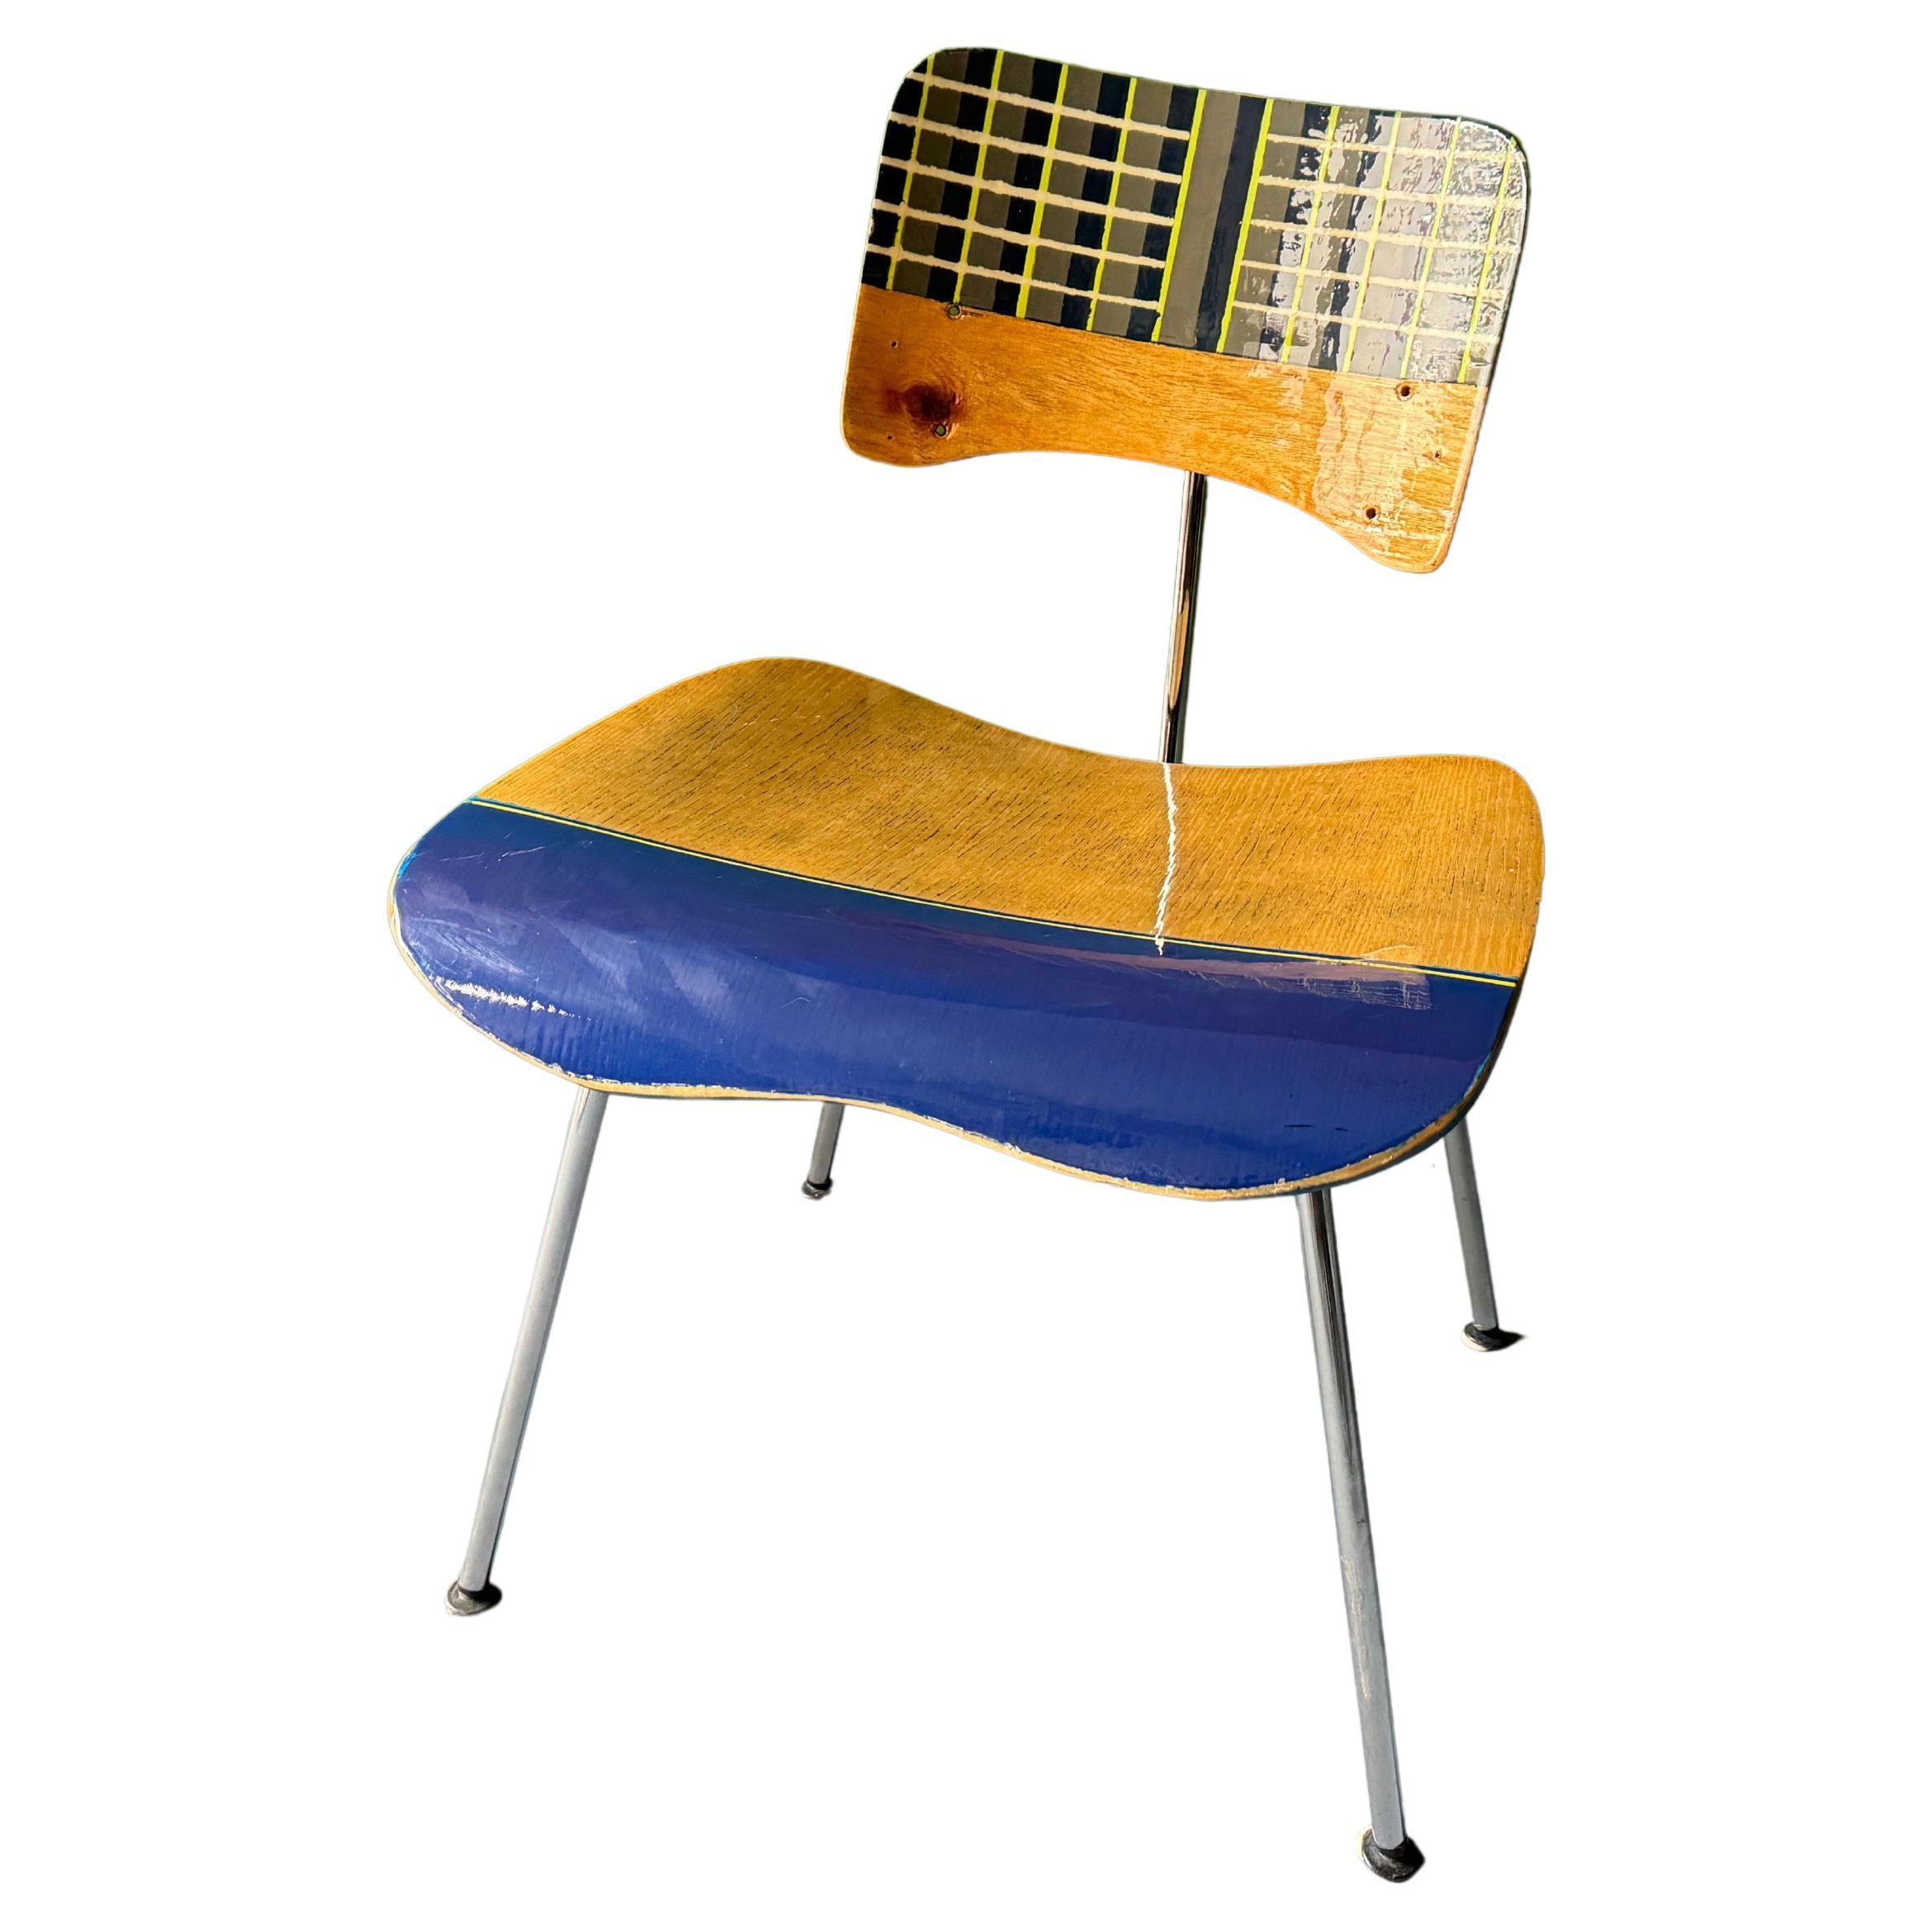 dcm chair contemporized by Markus Friedrich Staab